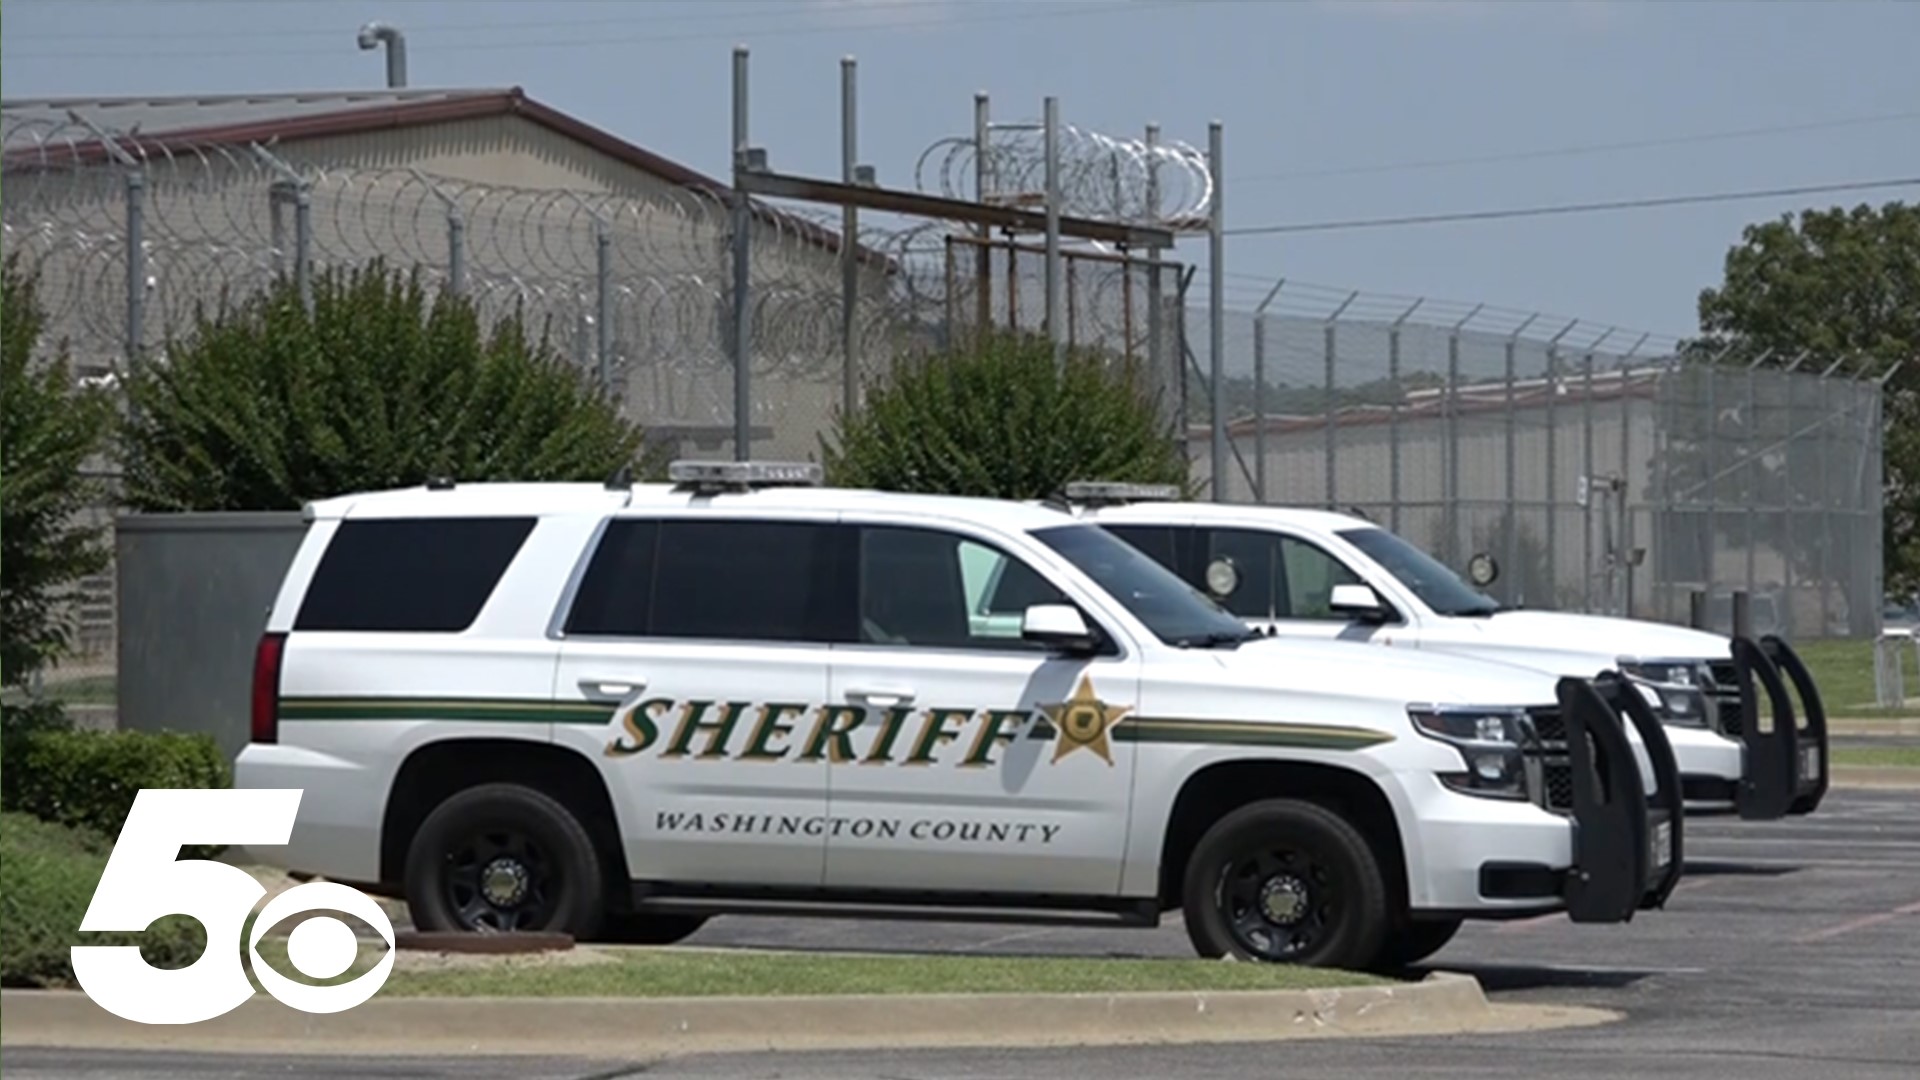 At their Thursday night meeting, the Quorum Court approved putting the Washington County Jail expansion on the ballot for residents to vote on this fall.